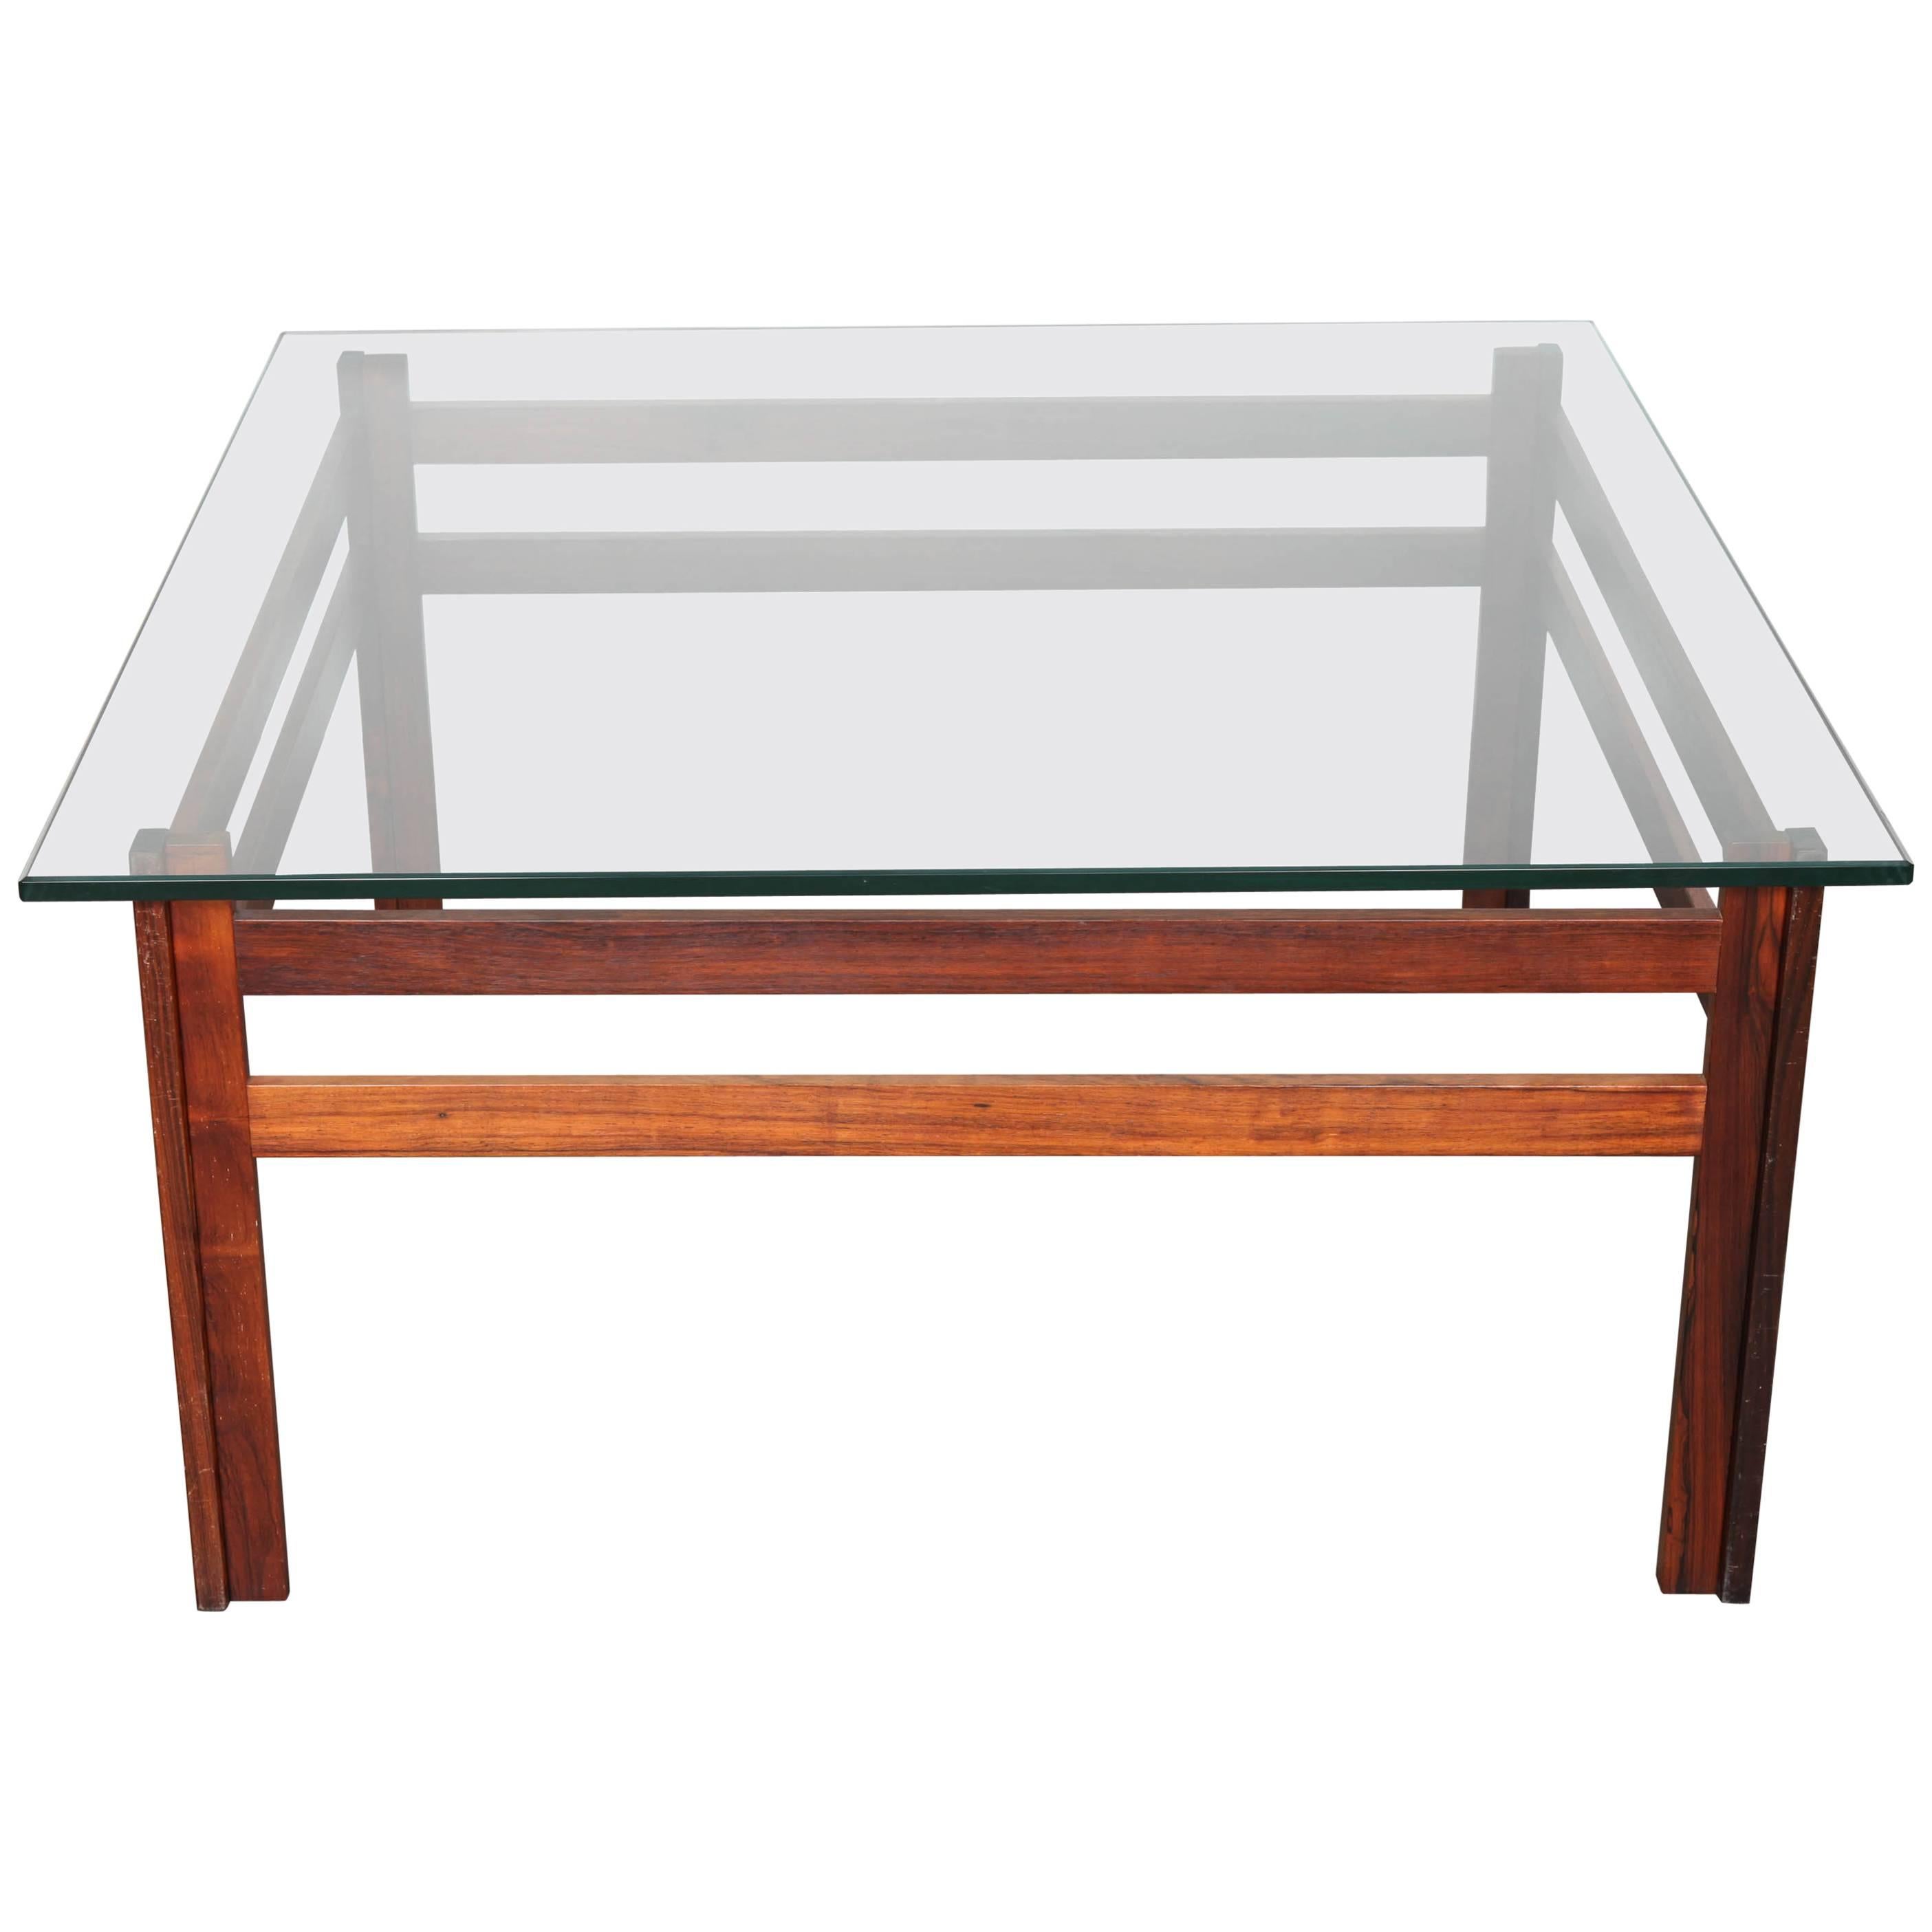 Mid-Century, Swedish, Rosewood Frame Coffee Table with Glass Top, Square